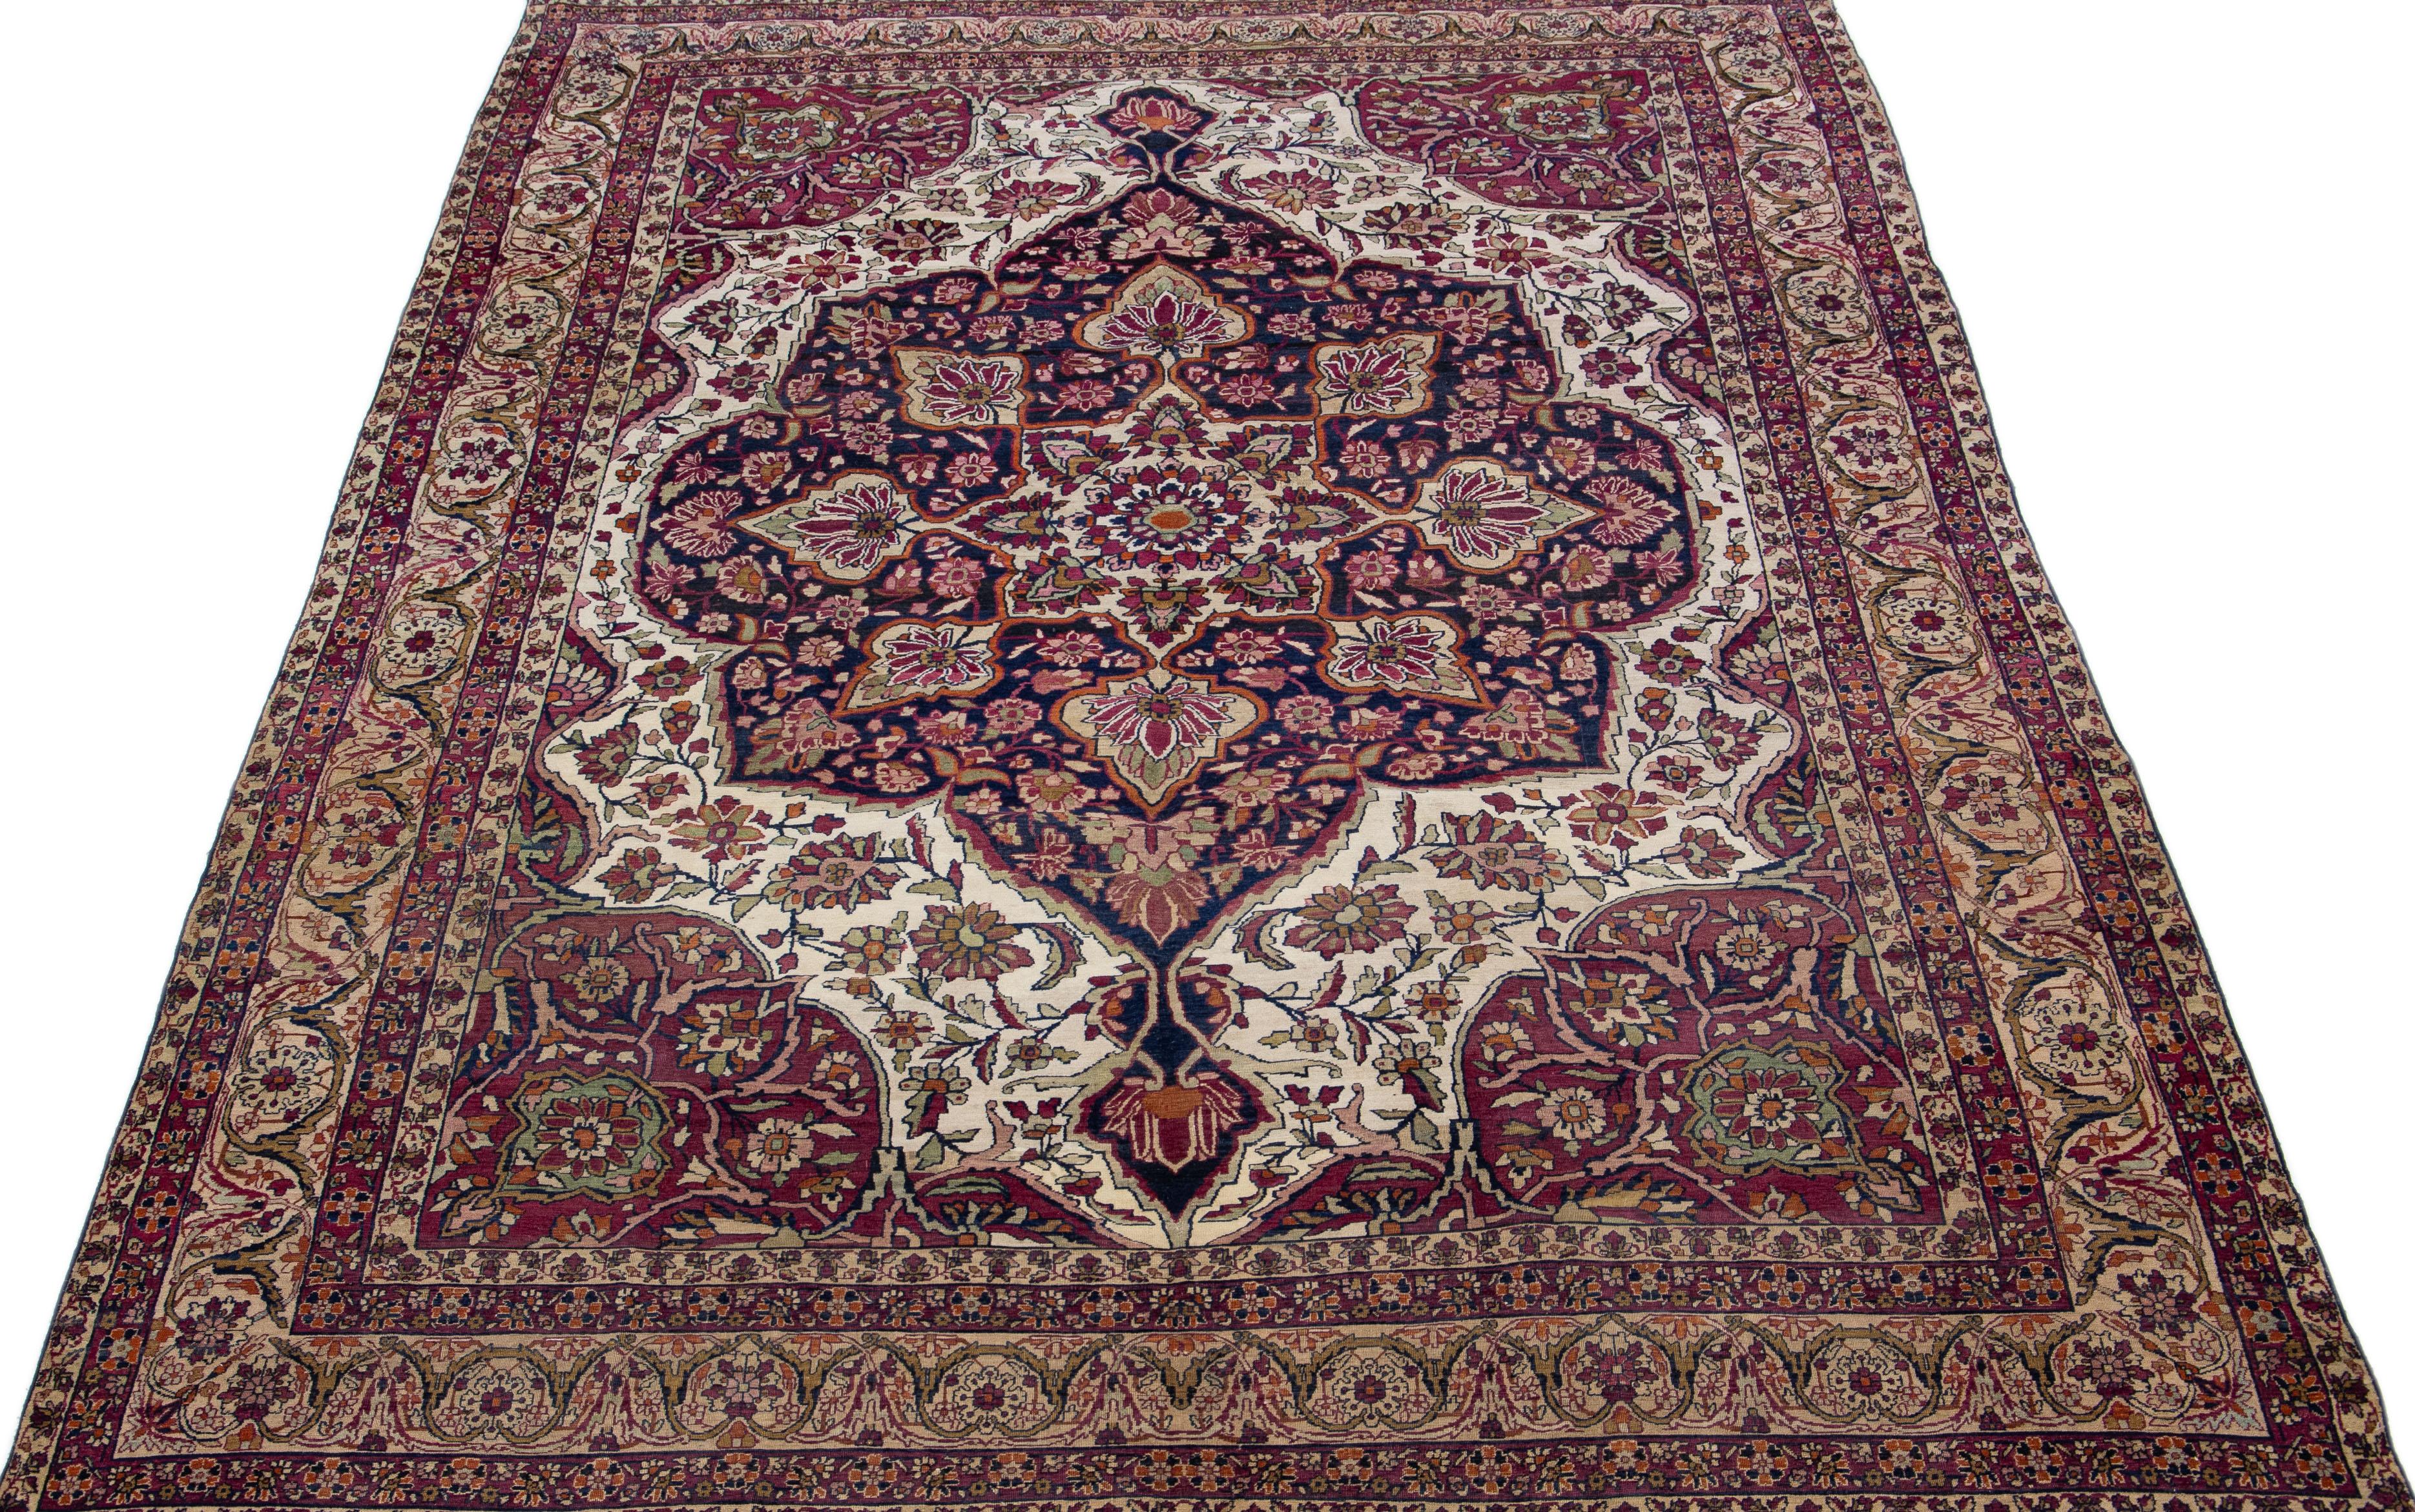 Beautiful antique Kerman hand-knotted wool rug with a burgundy color field. This Persian rug has multicolor accents in a gorgeous all-over medallion floral design.

This rug measures: 8'1